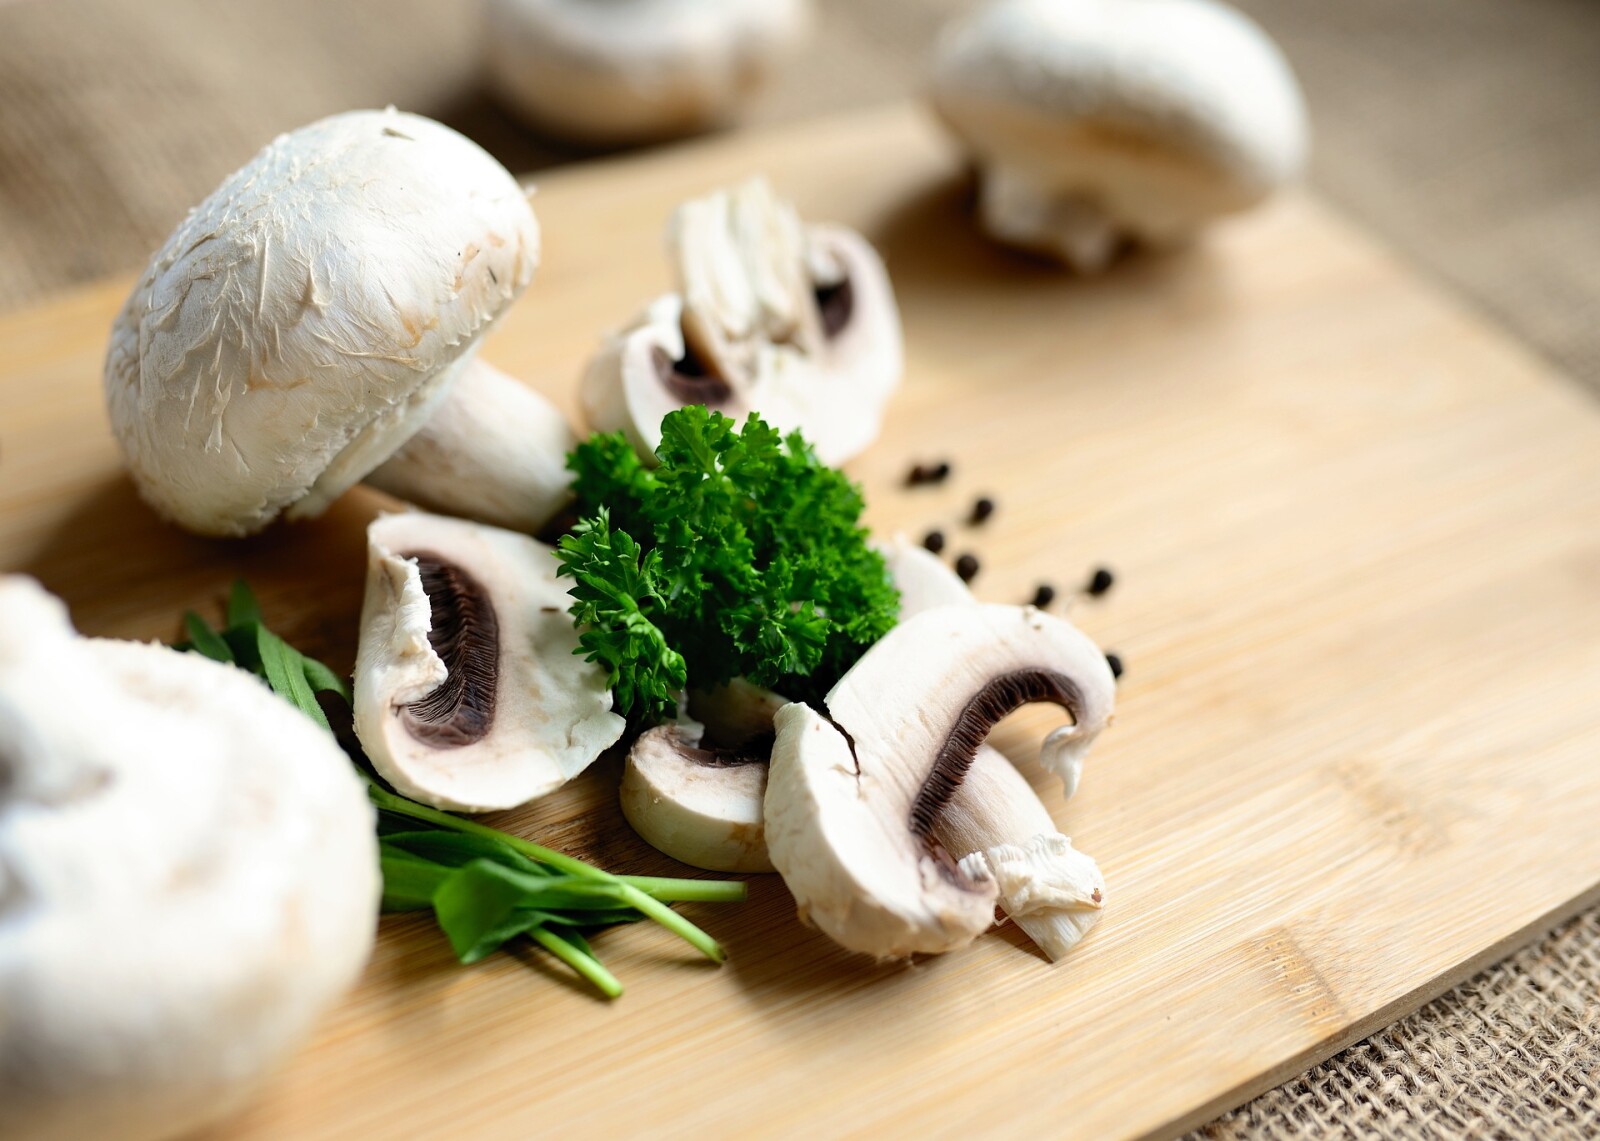 The Benefits of Cooking Mushrooms